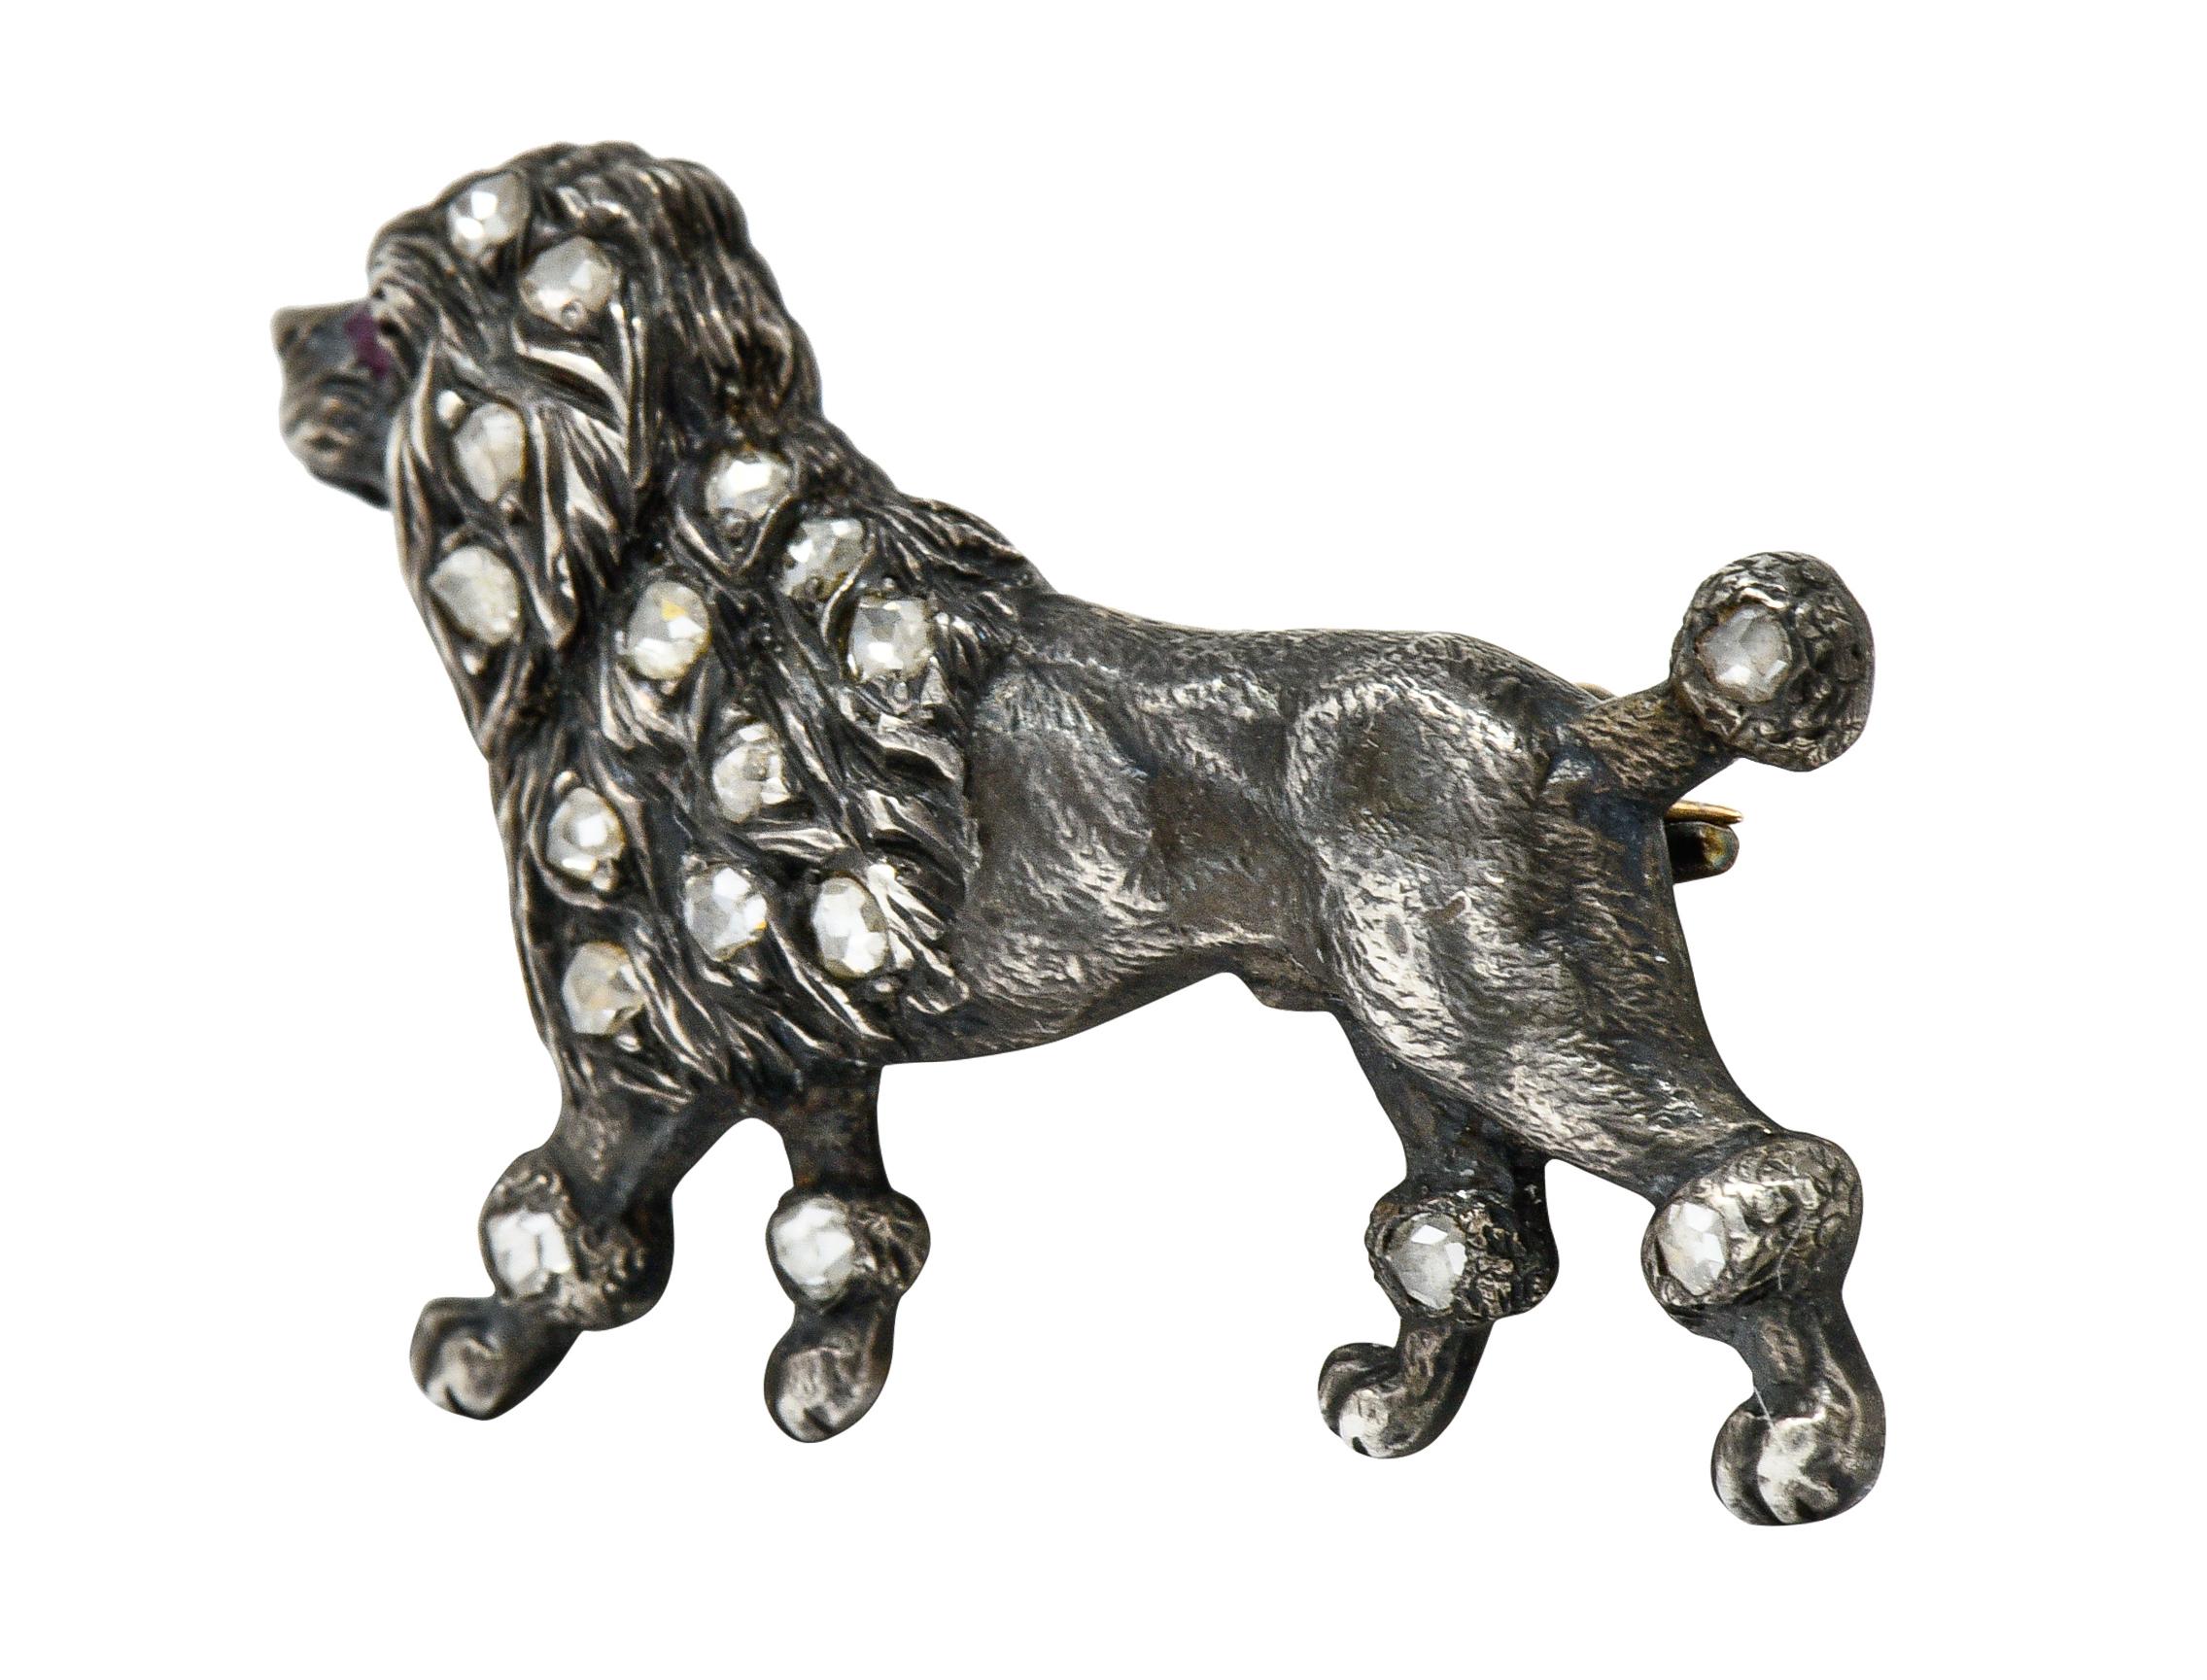 Brooch is designed as a proudly trotting poodle

With a highly rendered muscular body and finely textured fur

Accented by rose cut diamonds and a ruby eye; weighing in total approximately 0.30 carat

Completed by pin stem with closure

Tested as